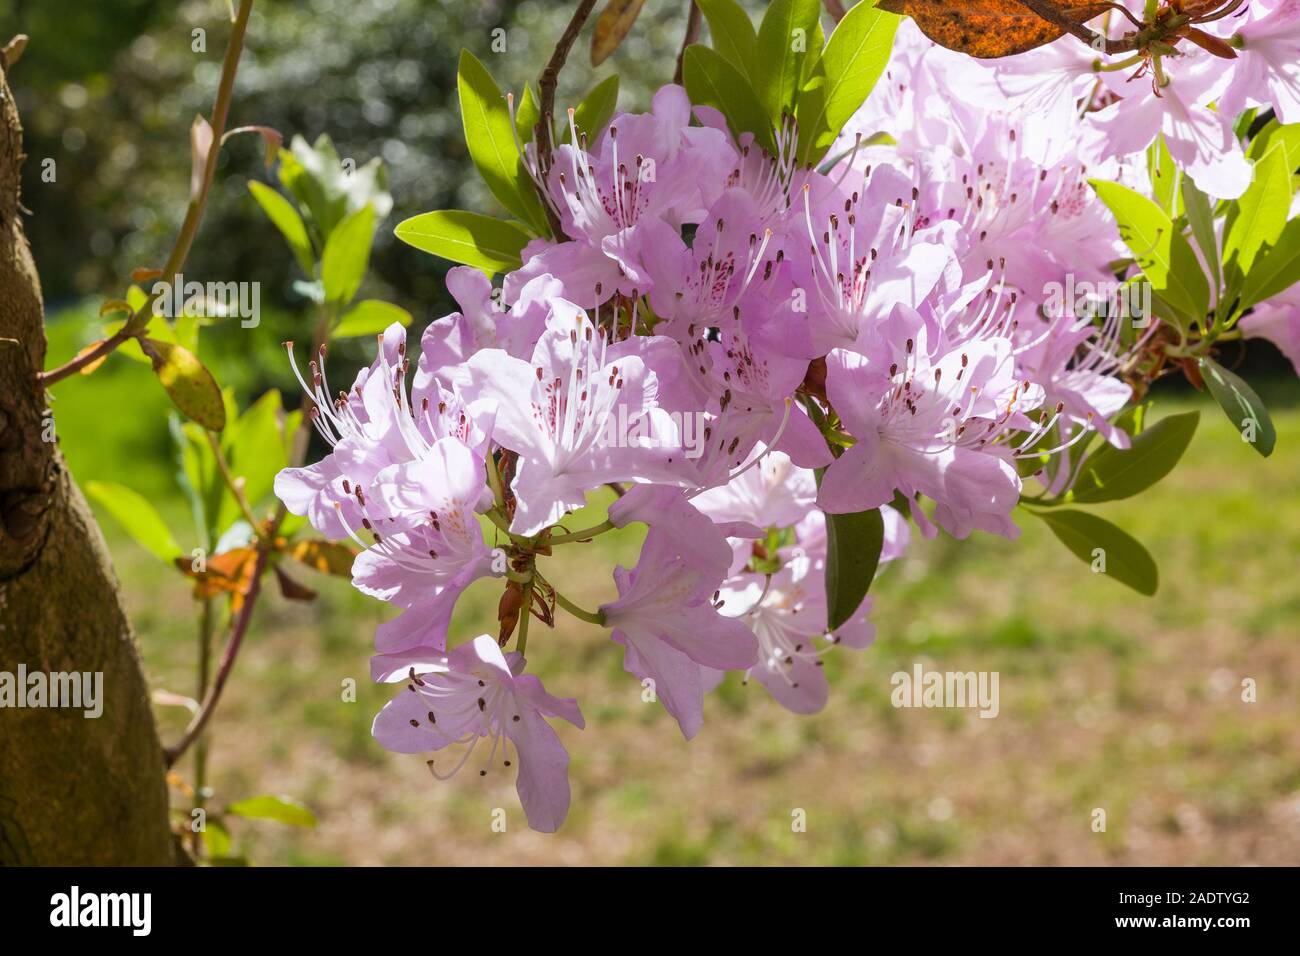 Rhododendron yunnanense flowering in May in English woodland garden Stock Photo